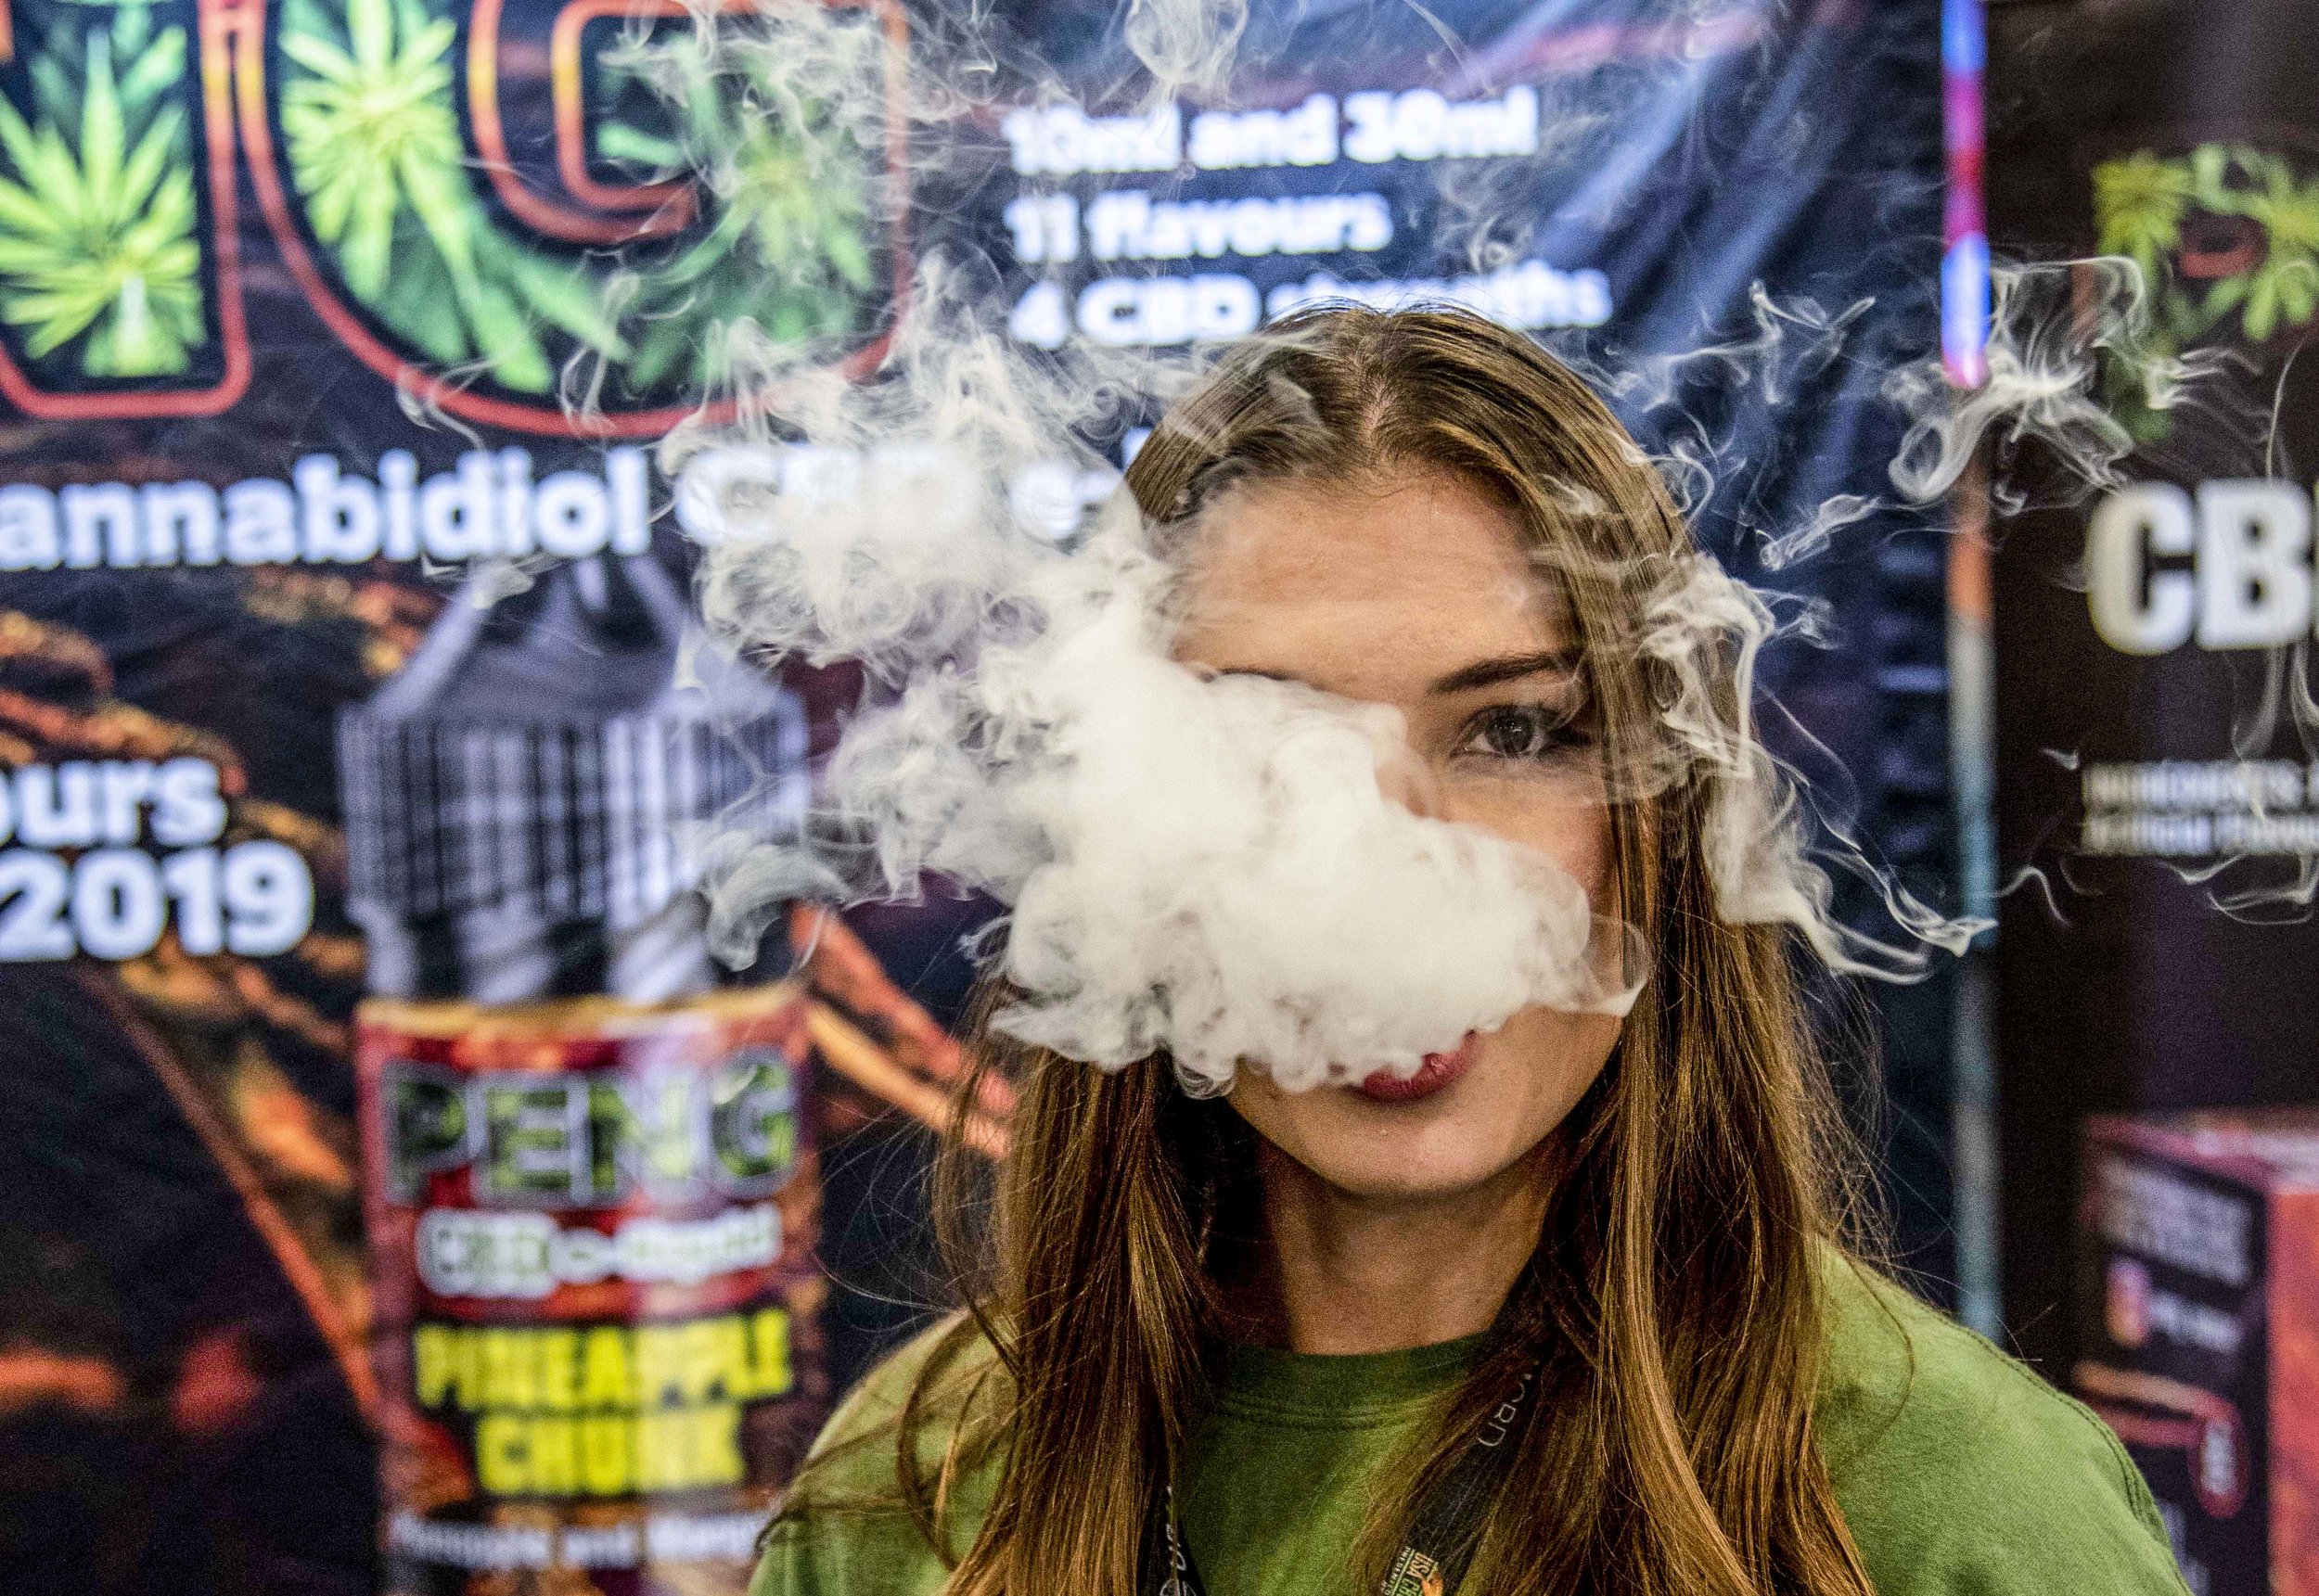  Ruth Carp, 21, the brand ambassador for Peng CBD, blows a cloud of vapor during the USA CBD Expo at the Miami Beach Convention Center on August 2, 2019. 